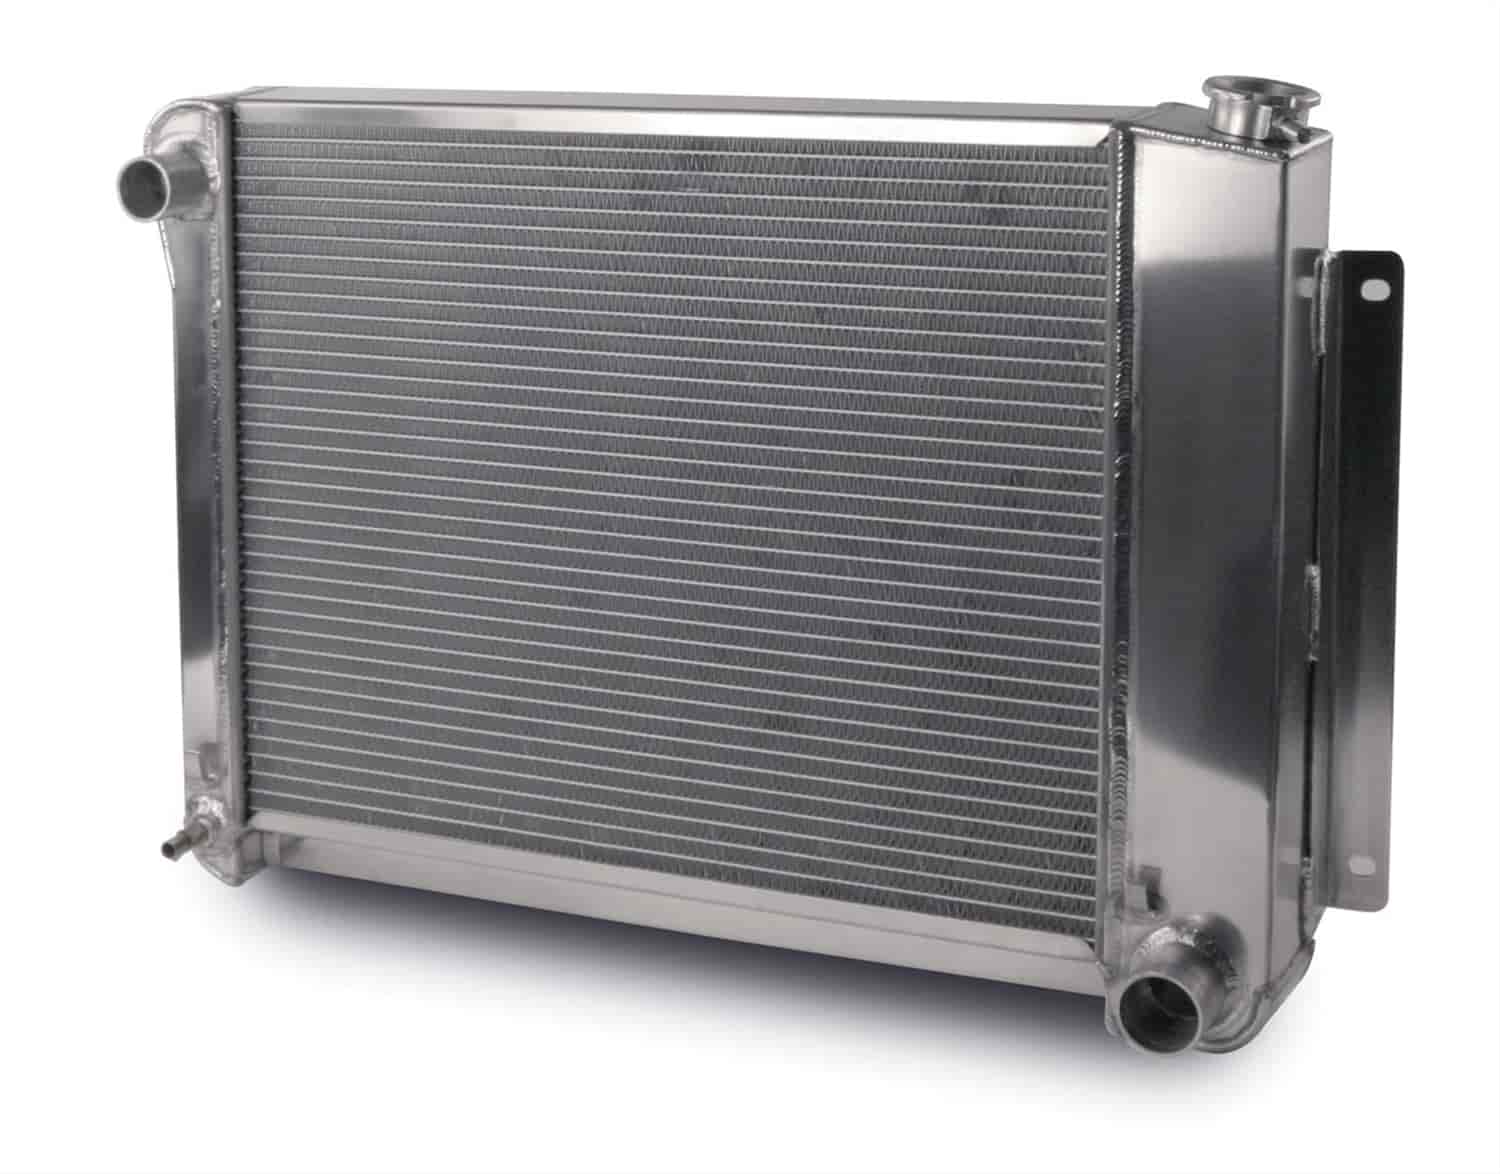 Direct-Fit Aluminum Radiator for 1967-1969 Chevrolet Camaro with Small Block Chevy V8 Engine [Natural Finish]